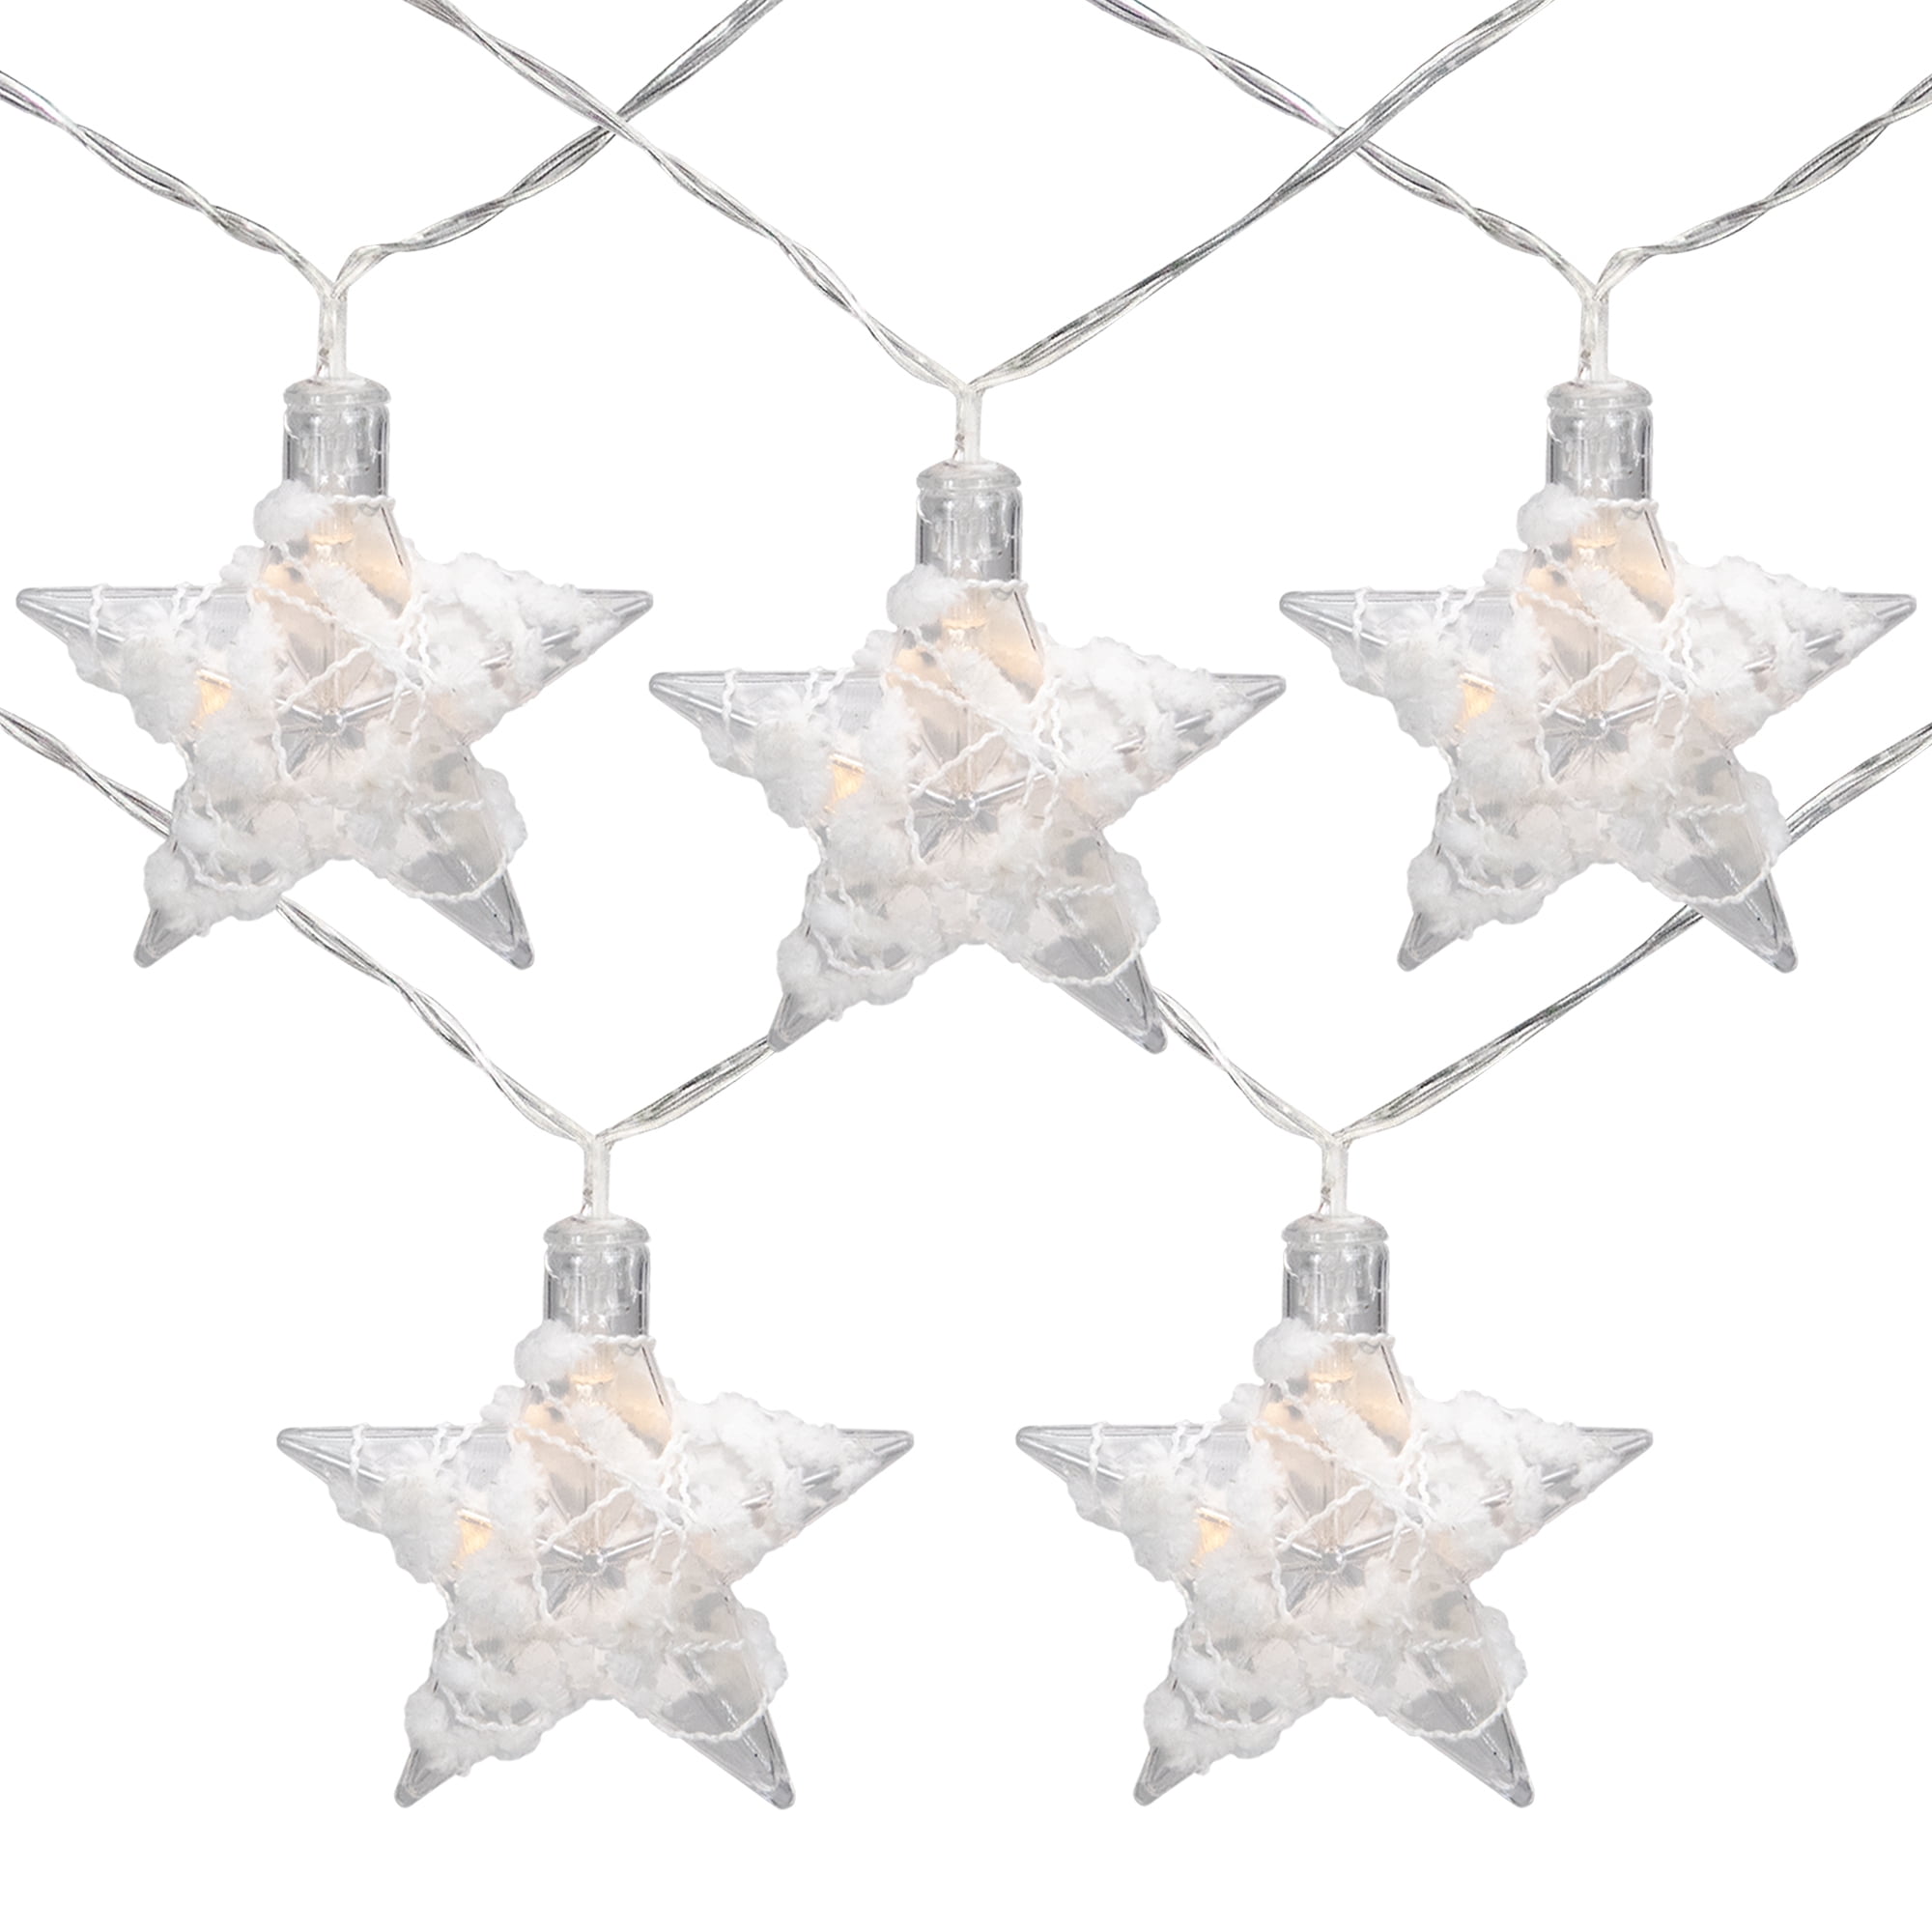 HOLIDAY LIVING 10ct WARM WHITE STAR LED BATTERY powered Christmas Lights SILVER 